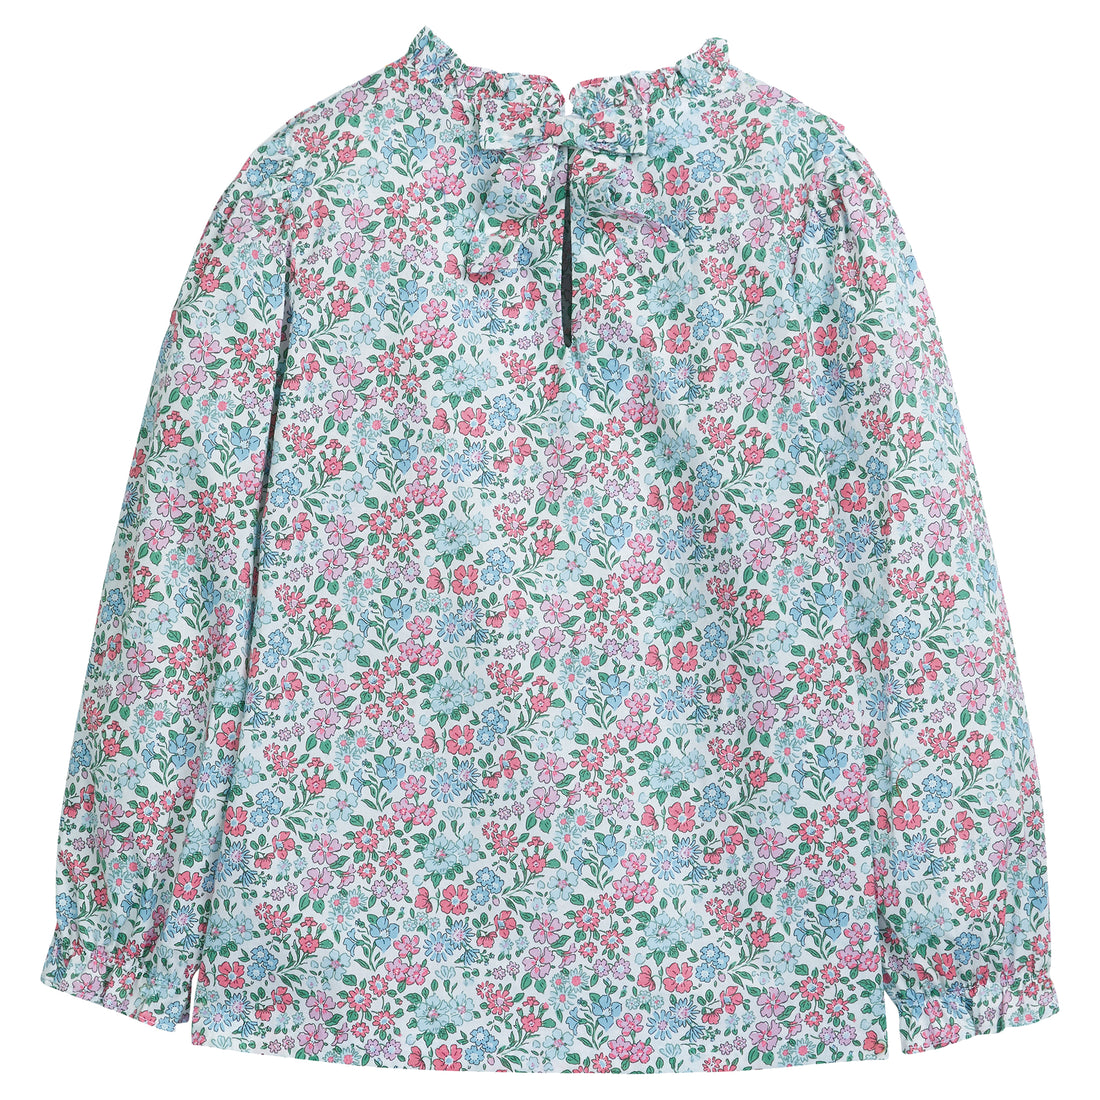 Little English classic childrens clothing girls long sleeve pink and blue floral blouse with ruffled collar